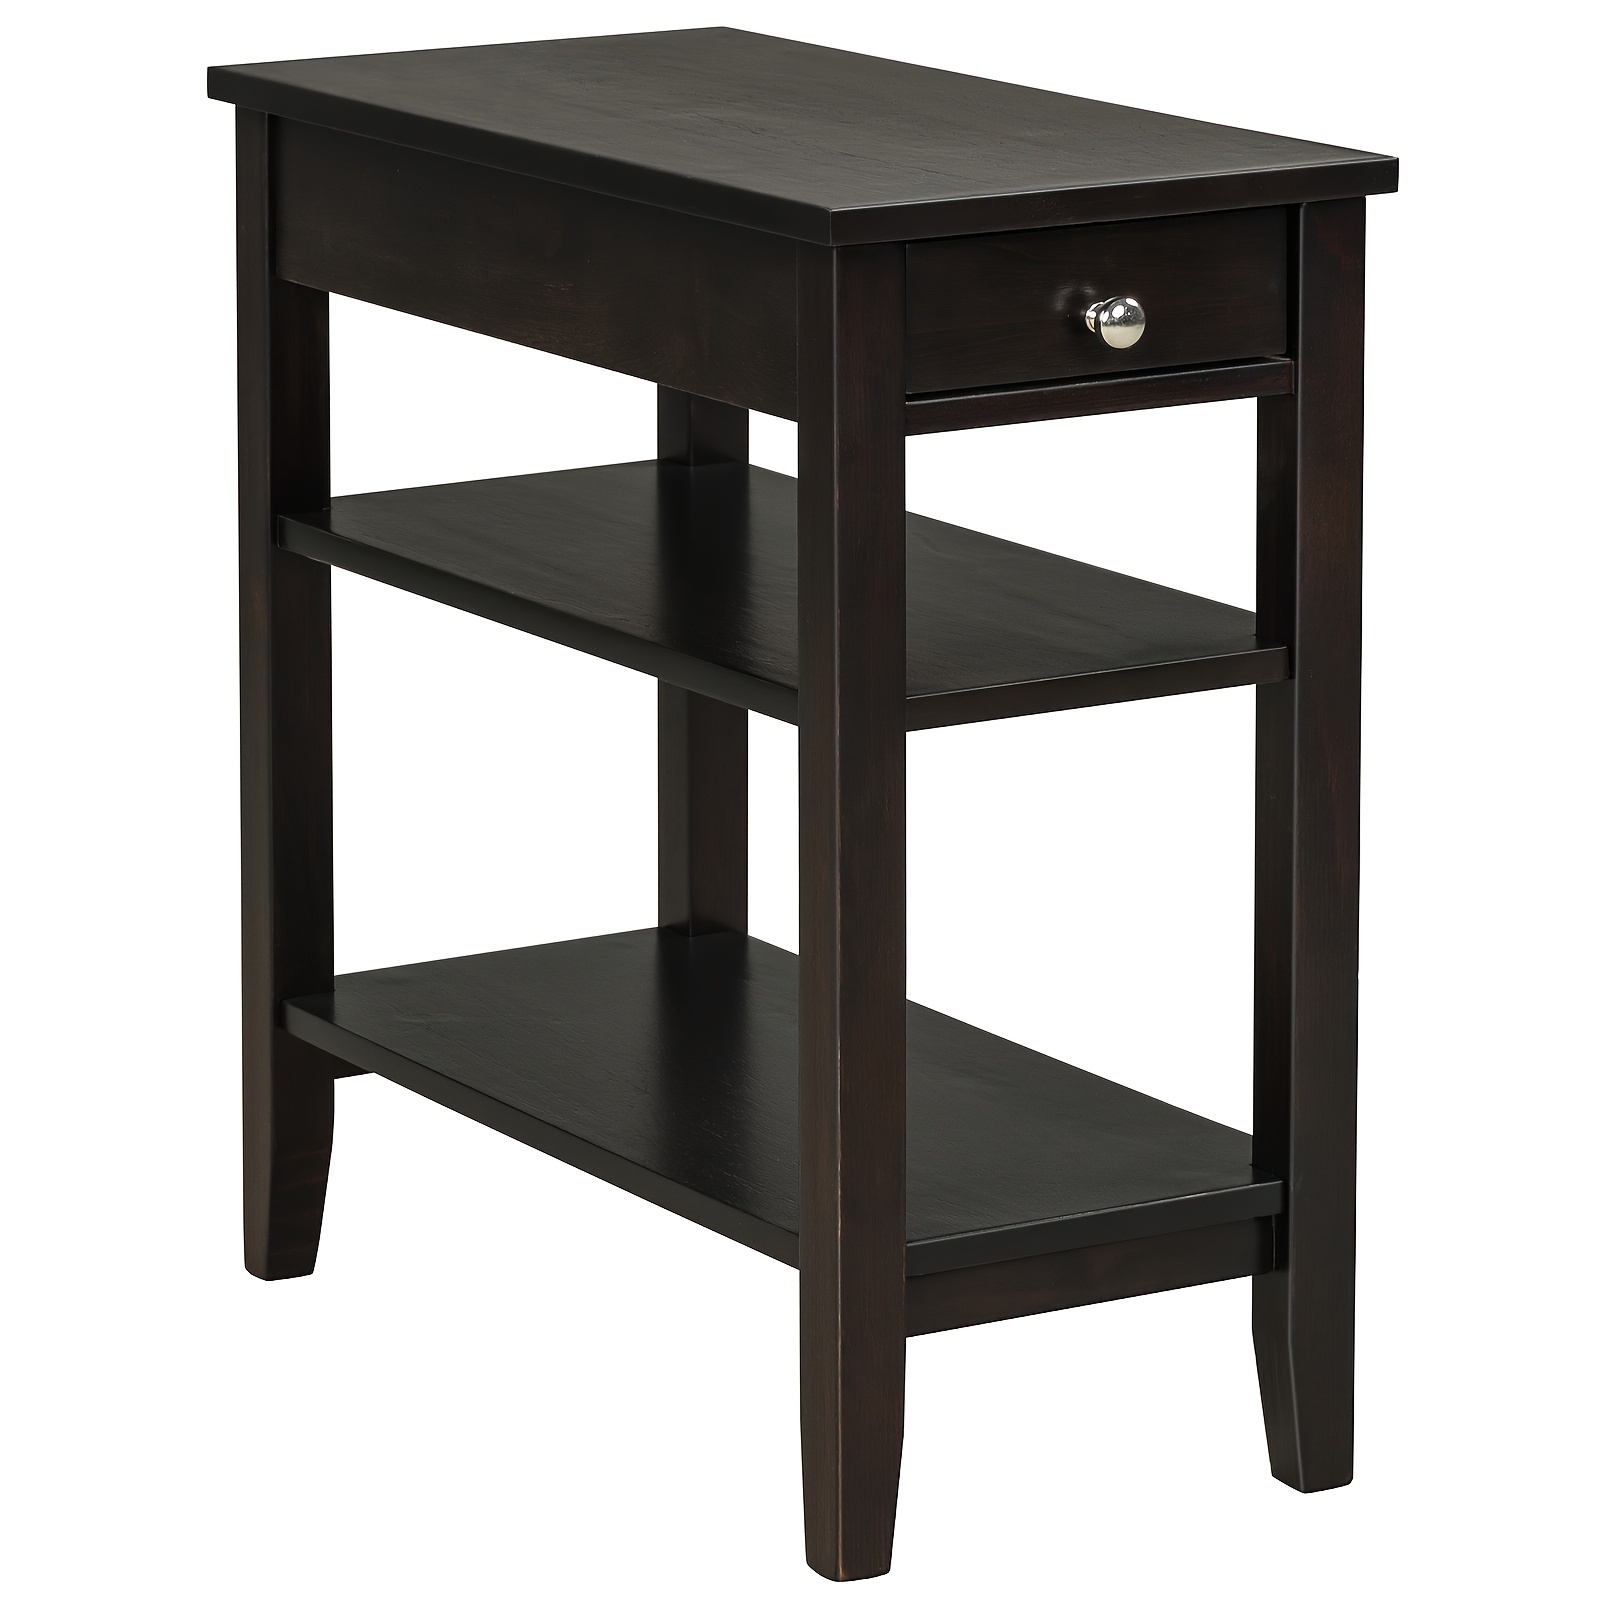 

1pc Table With Drawer, 3-tier End Table With 2 Storage Shelves, Narrow Bedside Table, Nightstand For Bedroom, Living Room, Dorm, Modern Accent